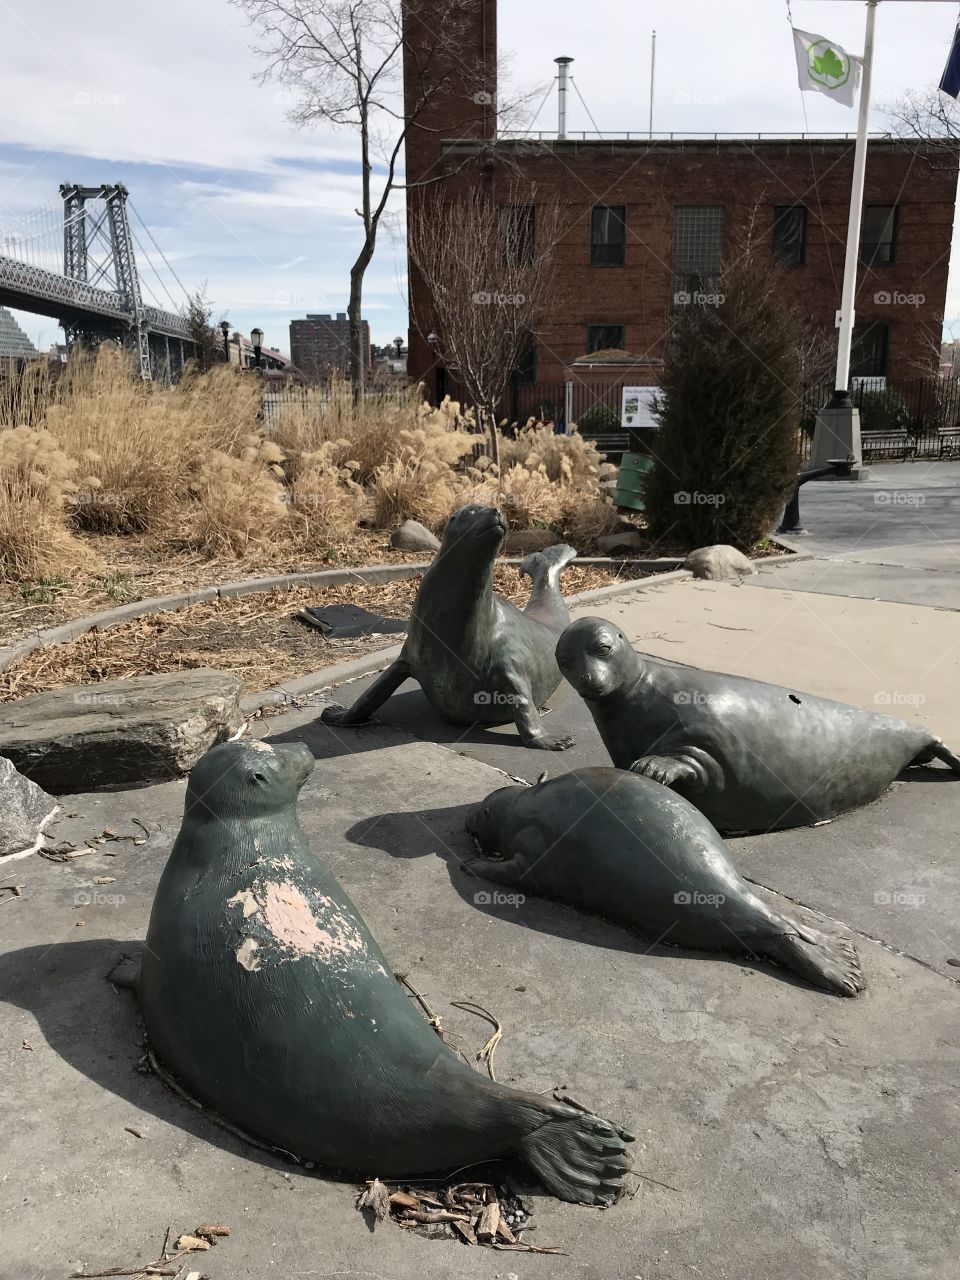 Seals in the East River Park NYC